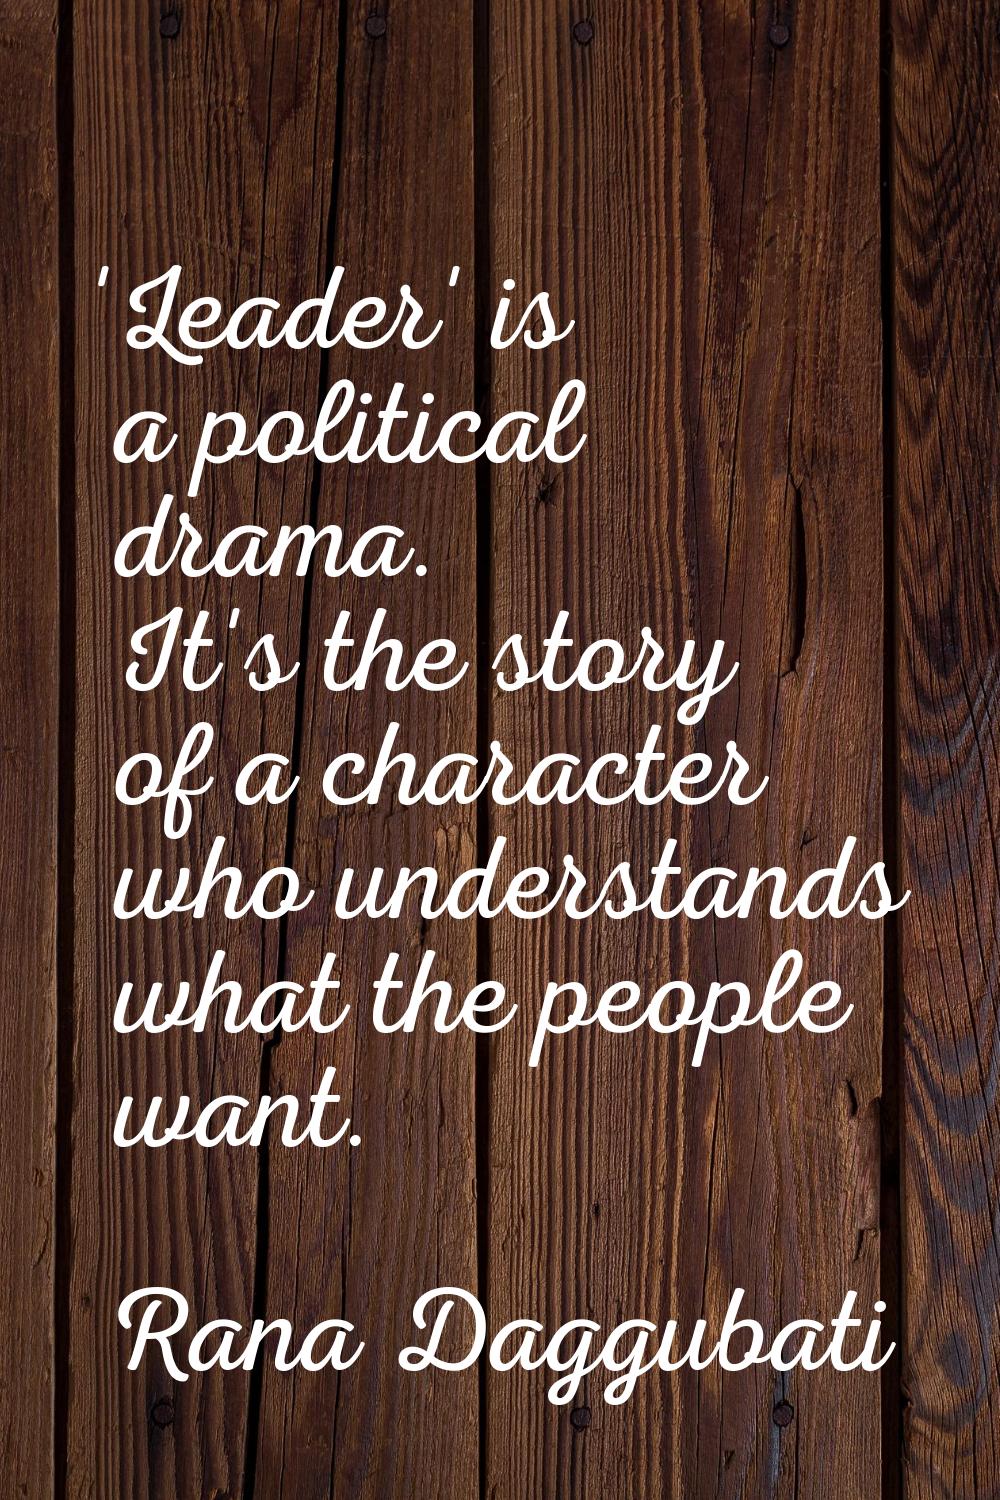 'Leader' is a political drama. It's the story of a character who understands what the people want.